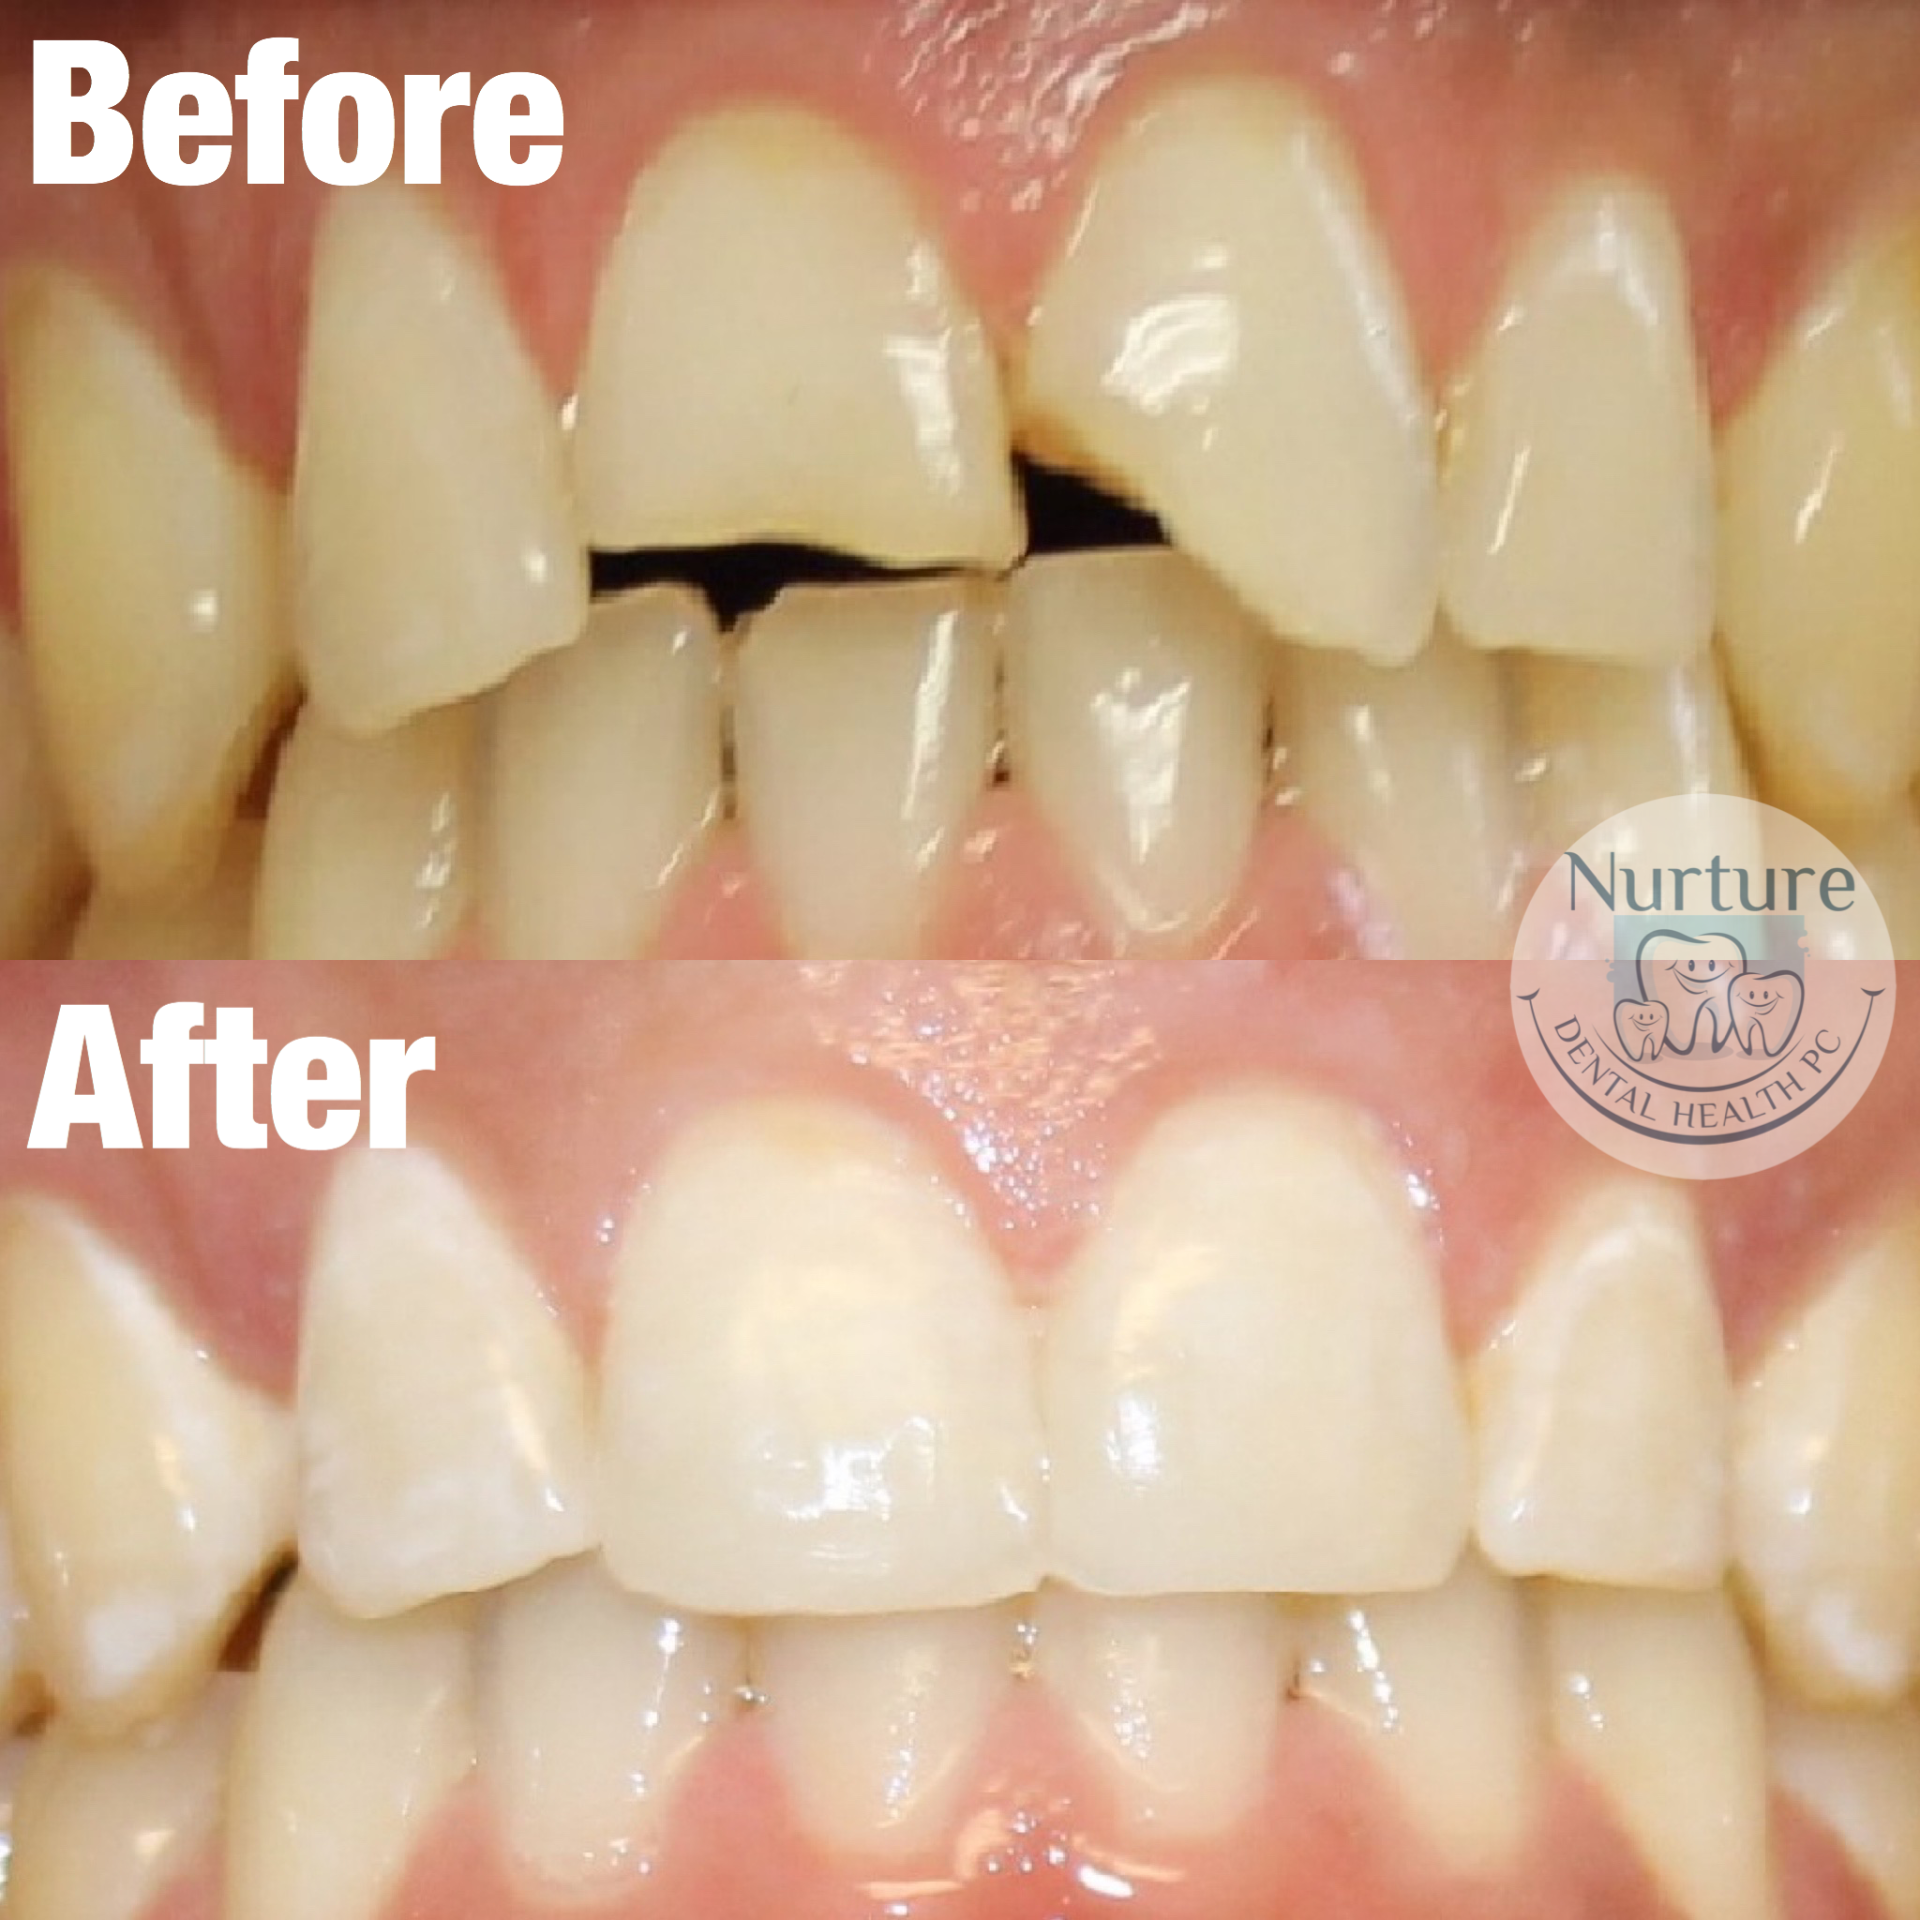 Before and after resin bonding after trauma to front teeth.